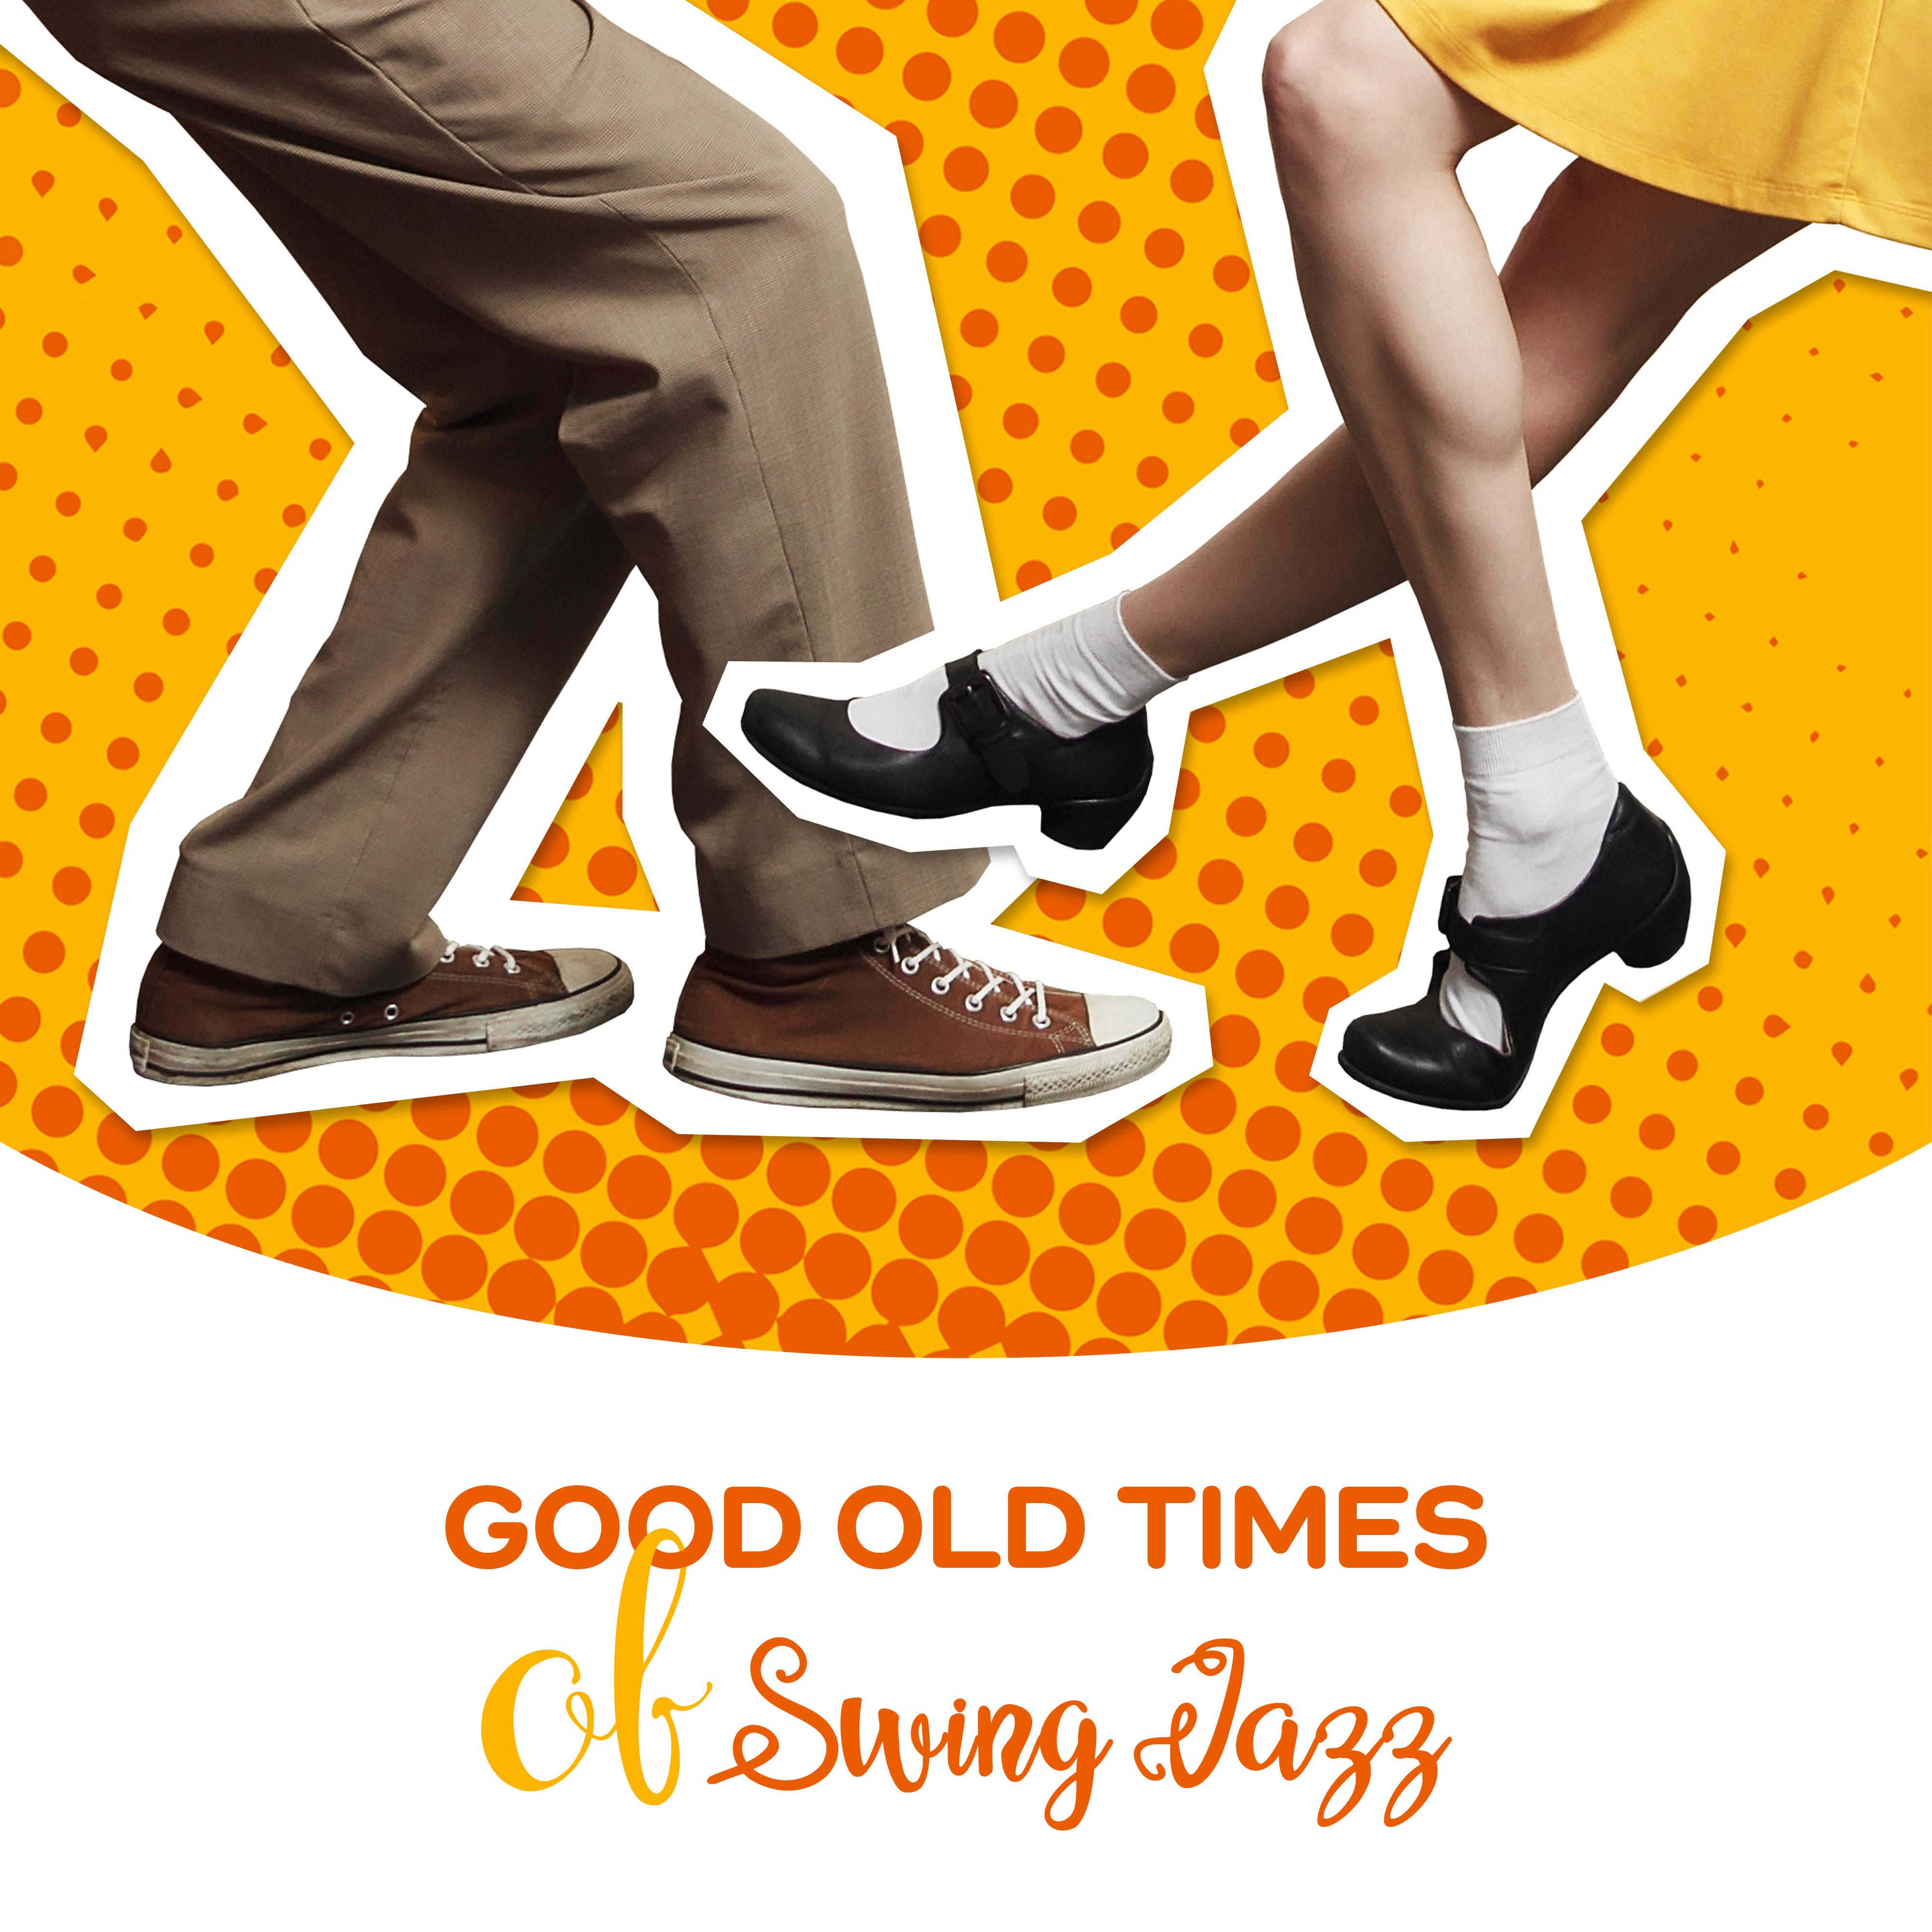 Good Old Times of Swing Jazz: 2019 Instrumental Smooth Jazz Music Compilation, Vintage Happy Melodies Played on Piano, Contrabass, Trumpet, Saxophone, Guitar & More